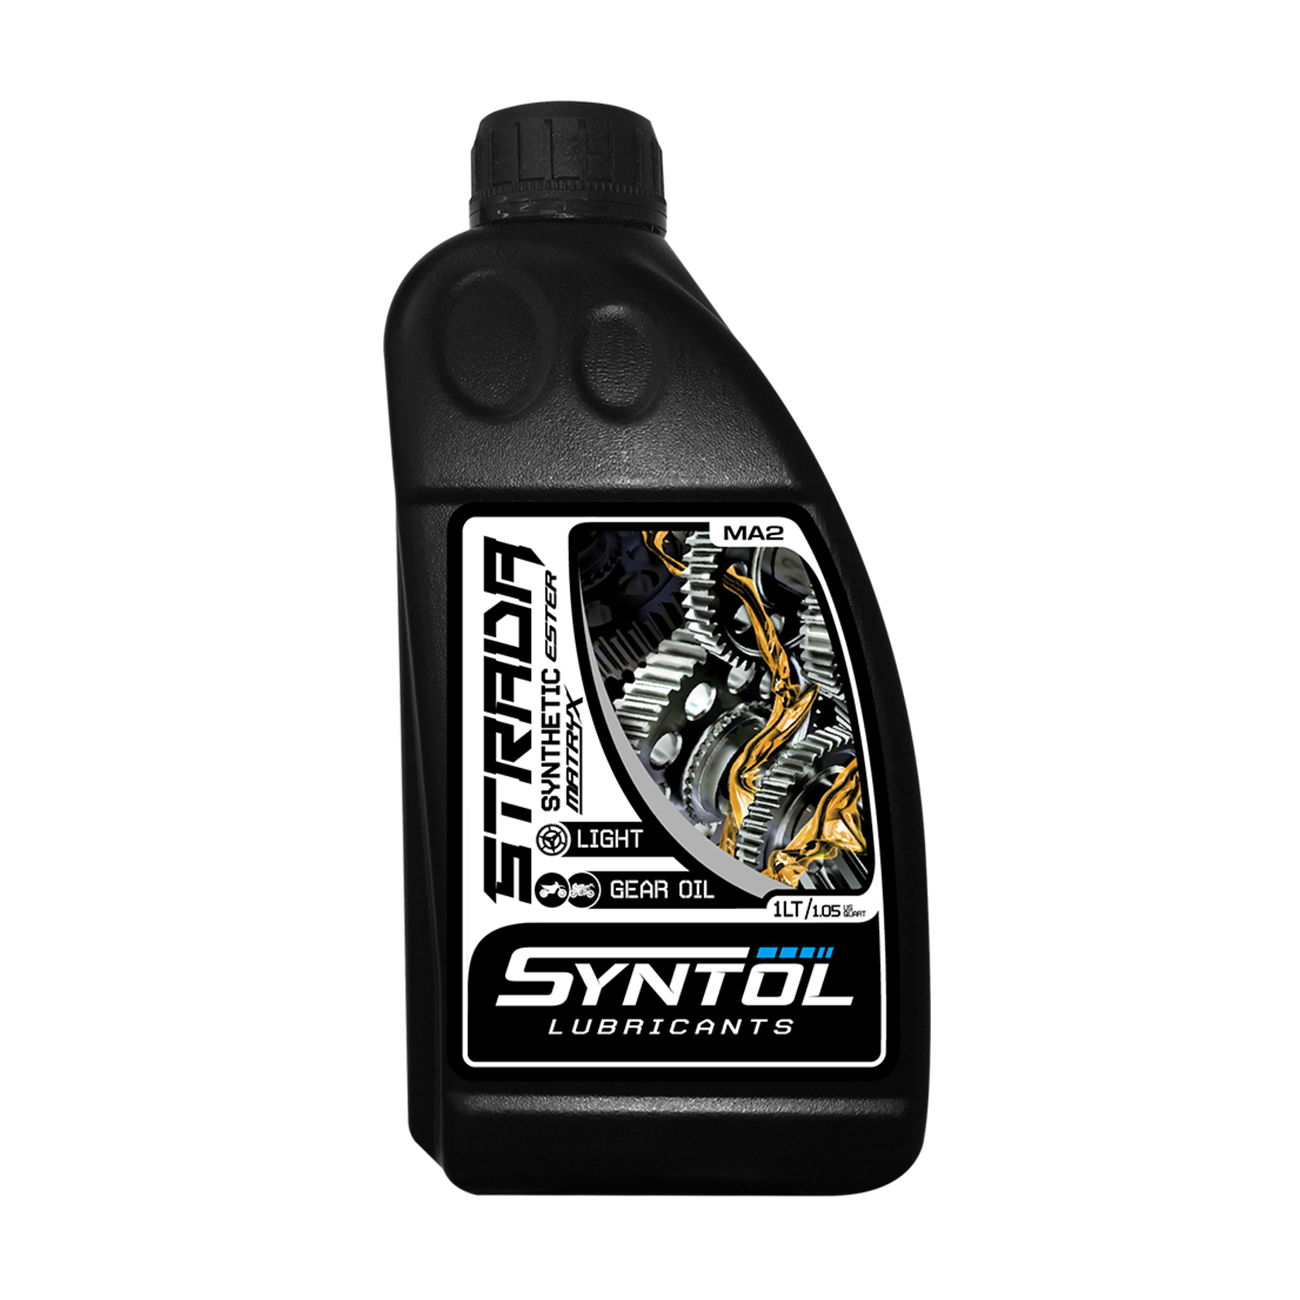 Syntol Strada 2T Light Gearbox Oil - 1 Litre-F0044-1-Oils and Lubricants-Pyramid Motorcycle Accessories